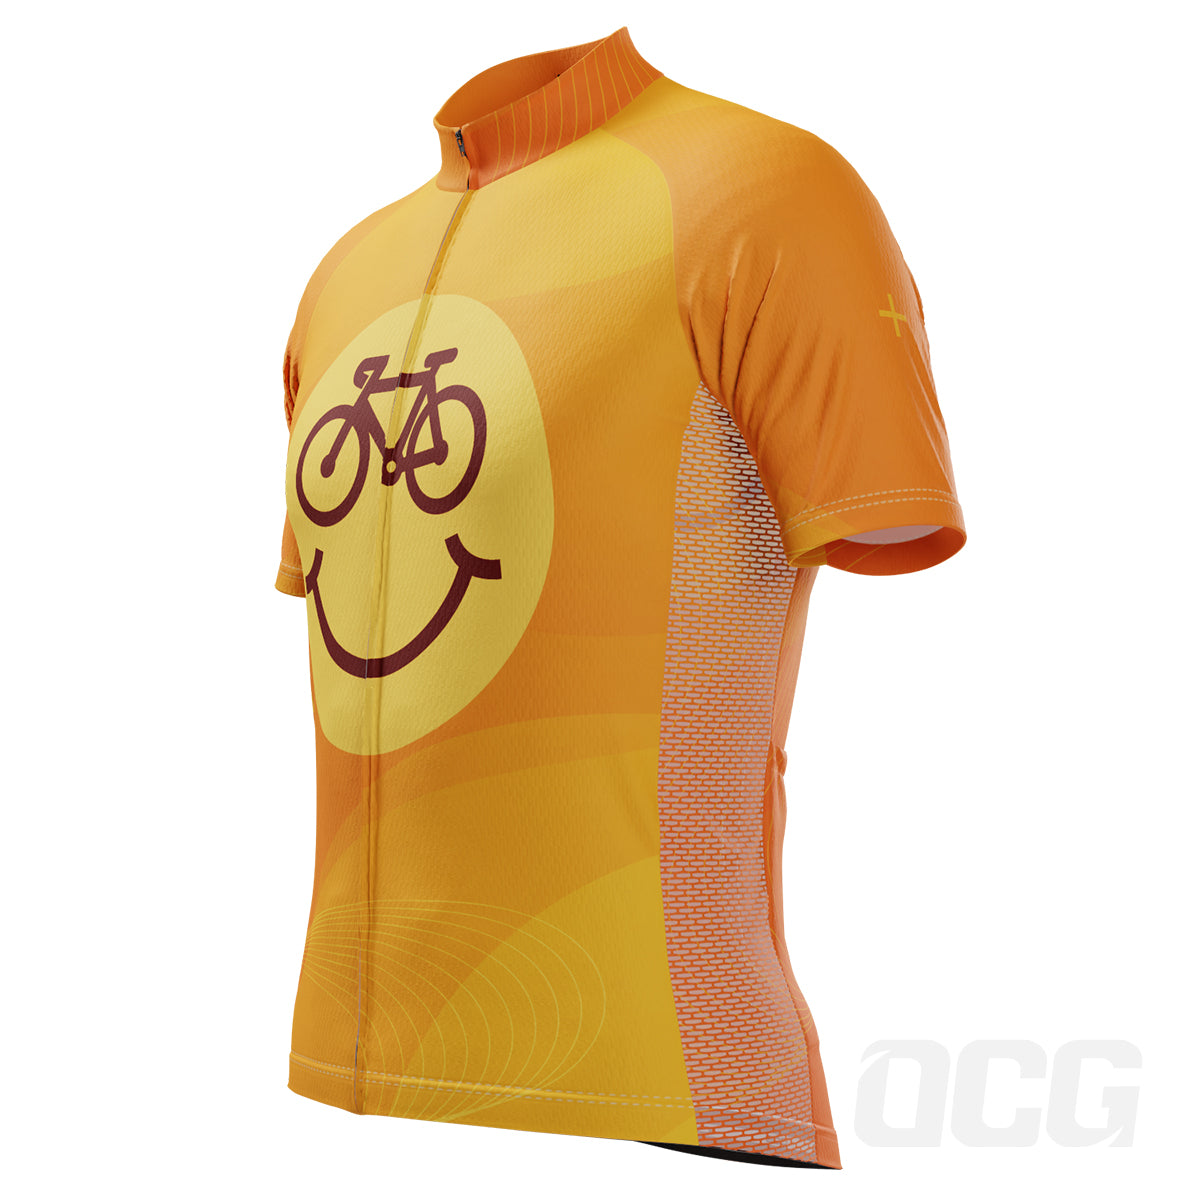 Men's Cycling is Happiness Emoji Short Sleeve Cycling Jersey